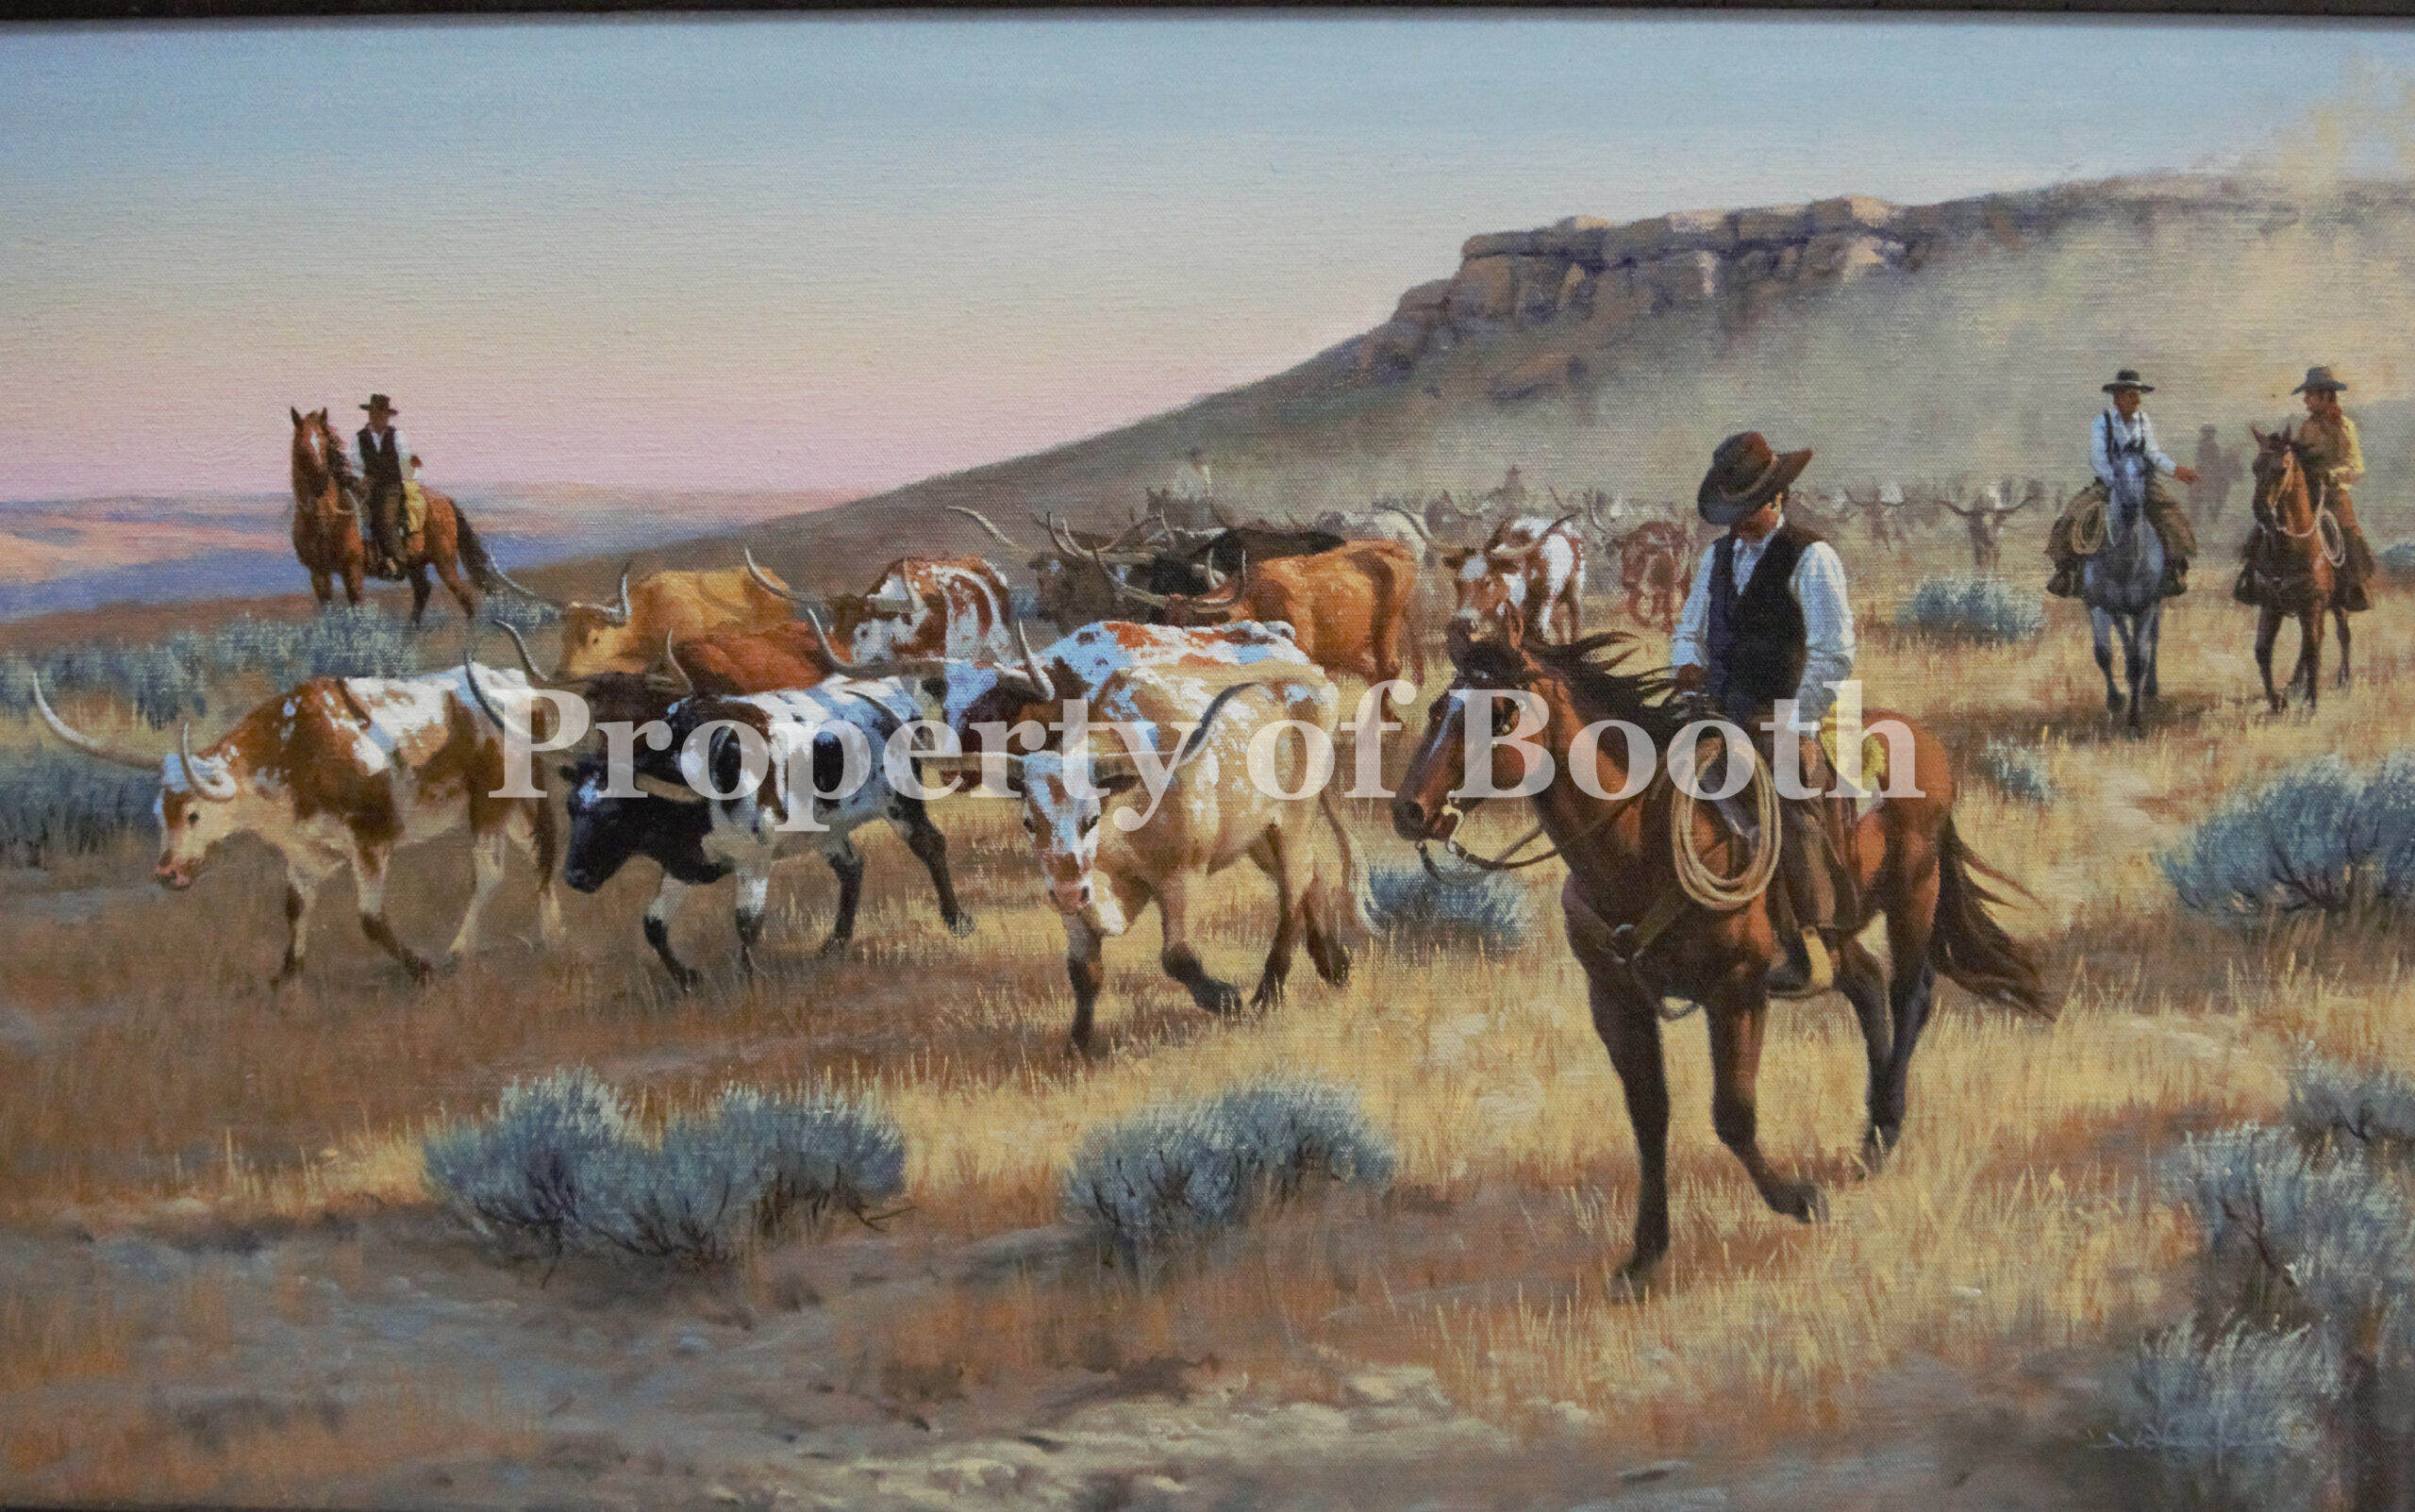 © James Whartman, Up From Texas, 2008, oil on canvas, 18 x 30", Gift of Candace McNair